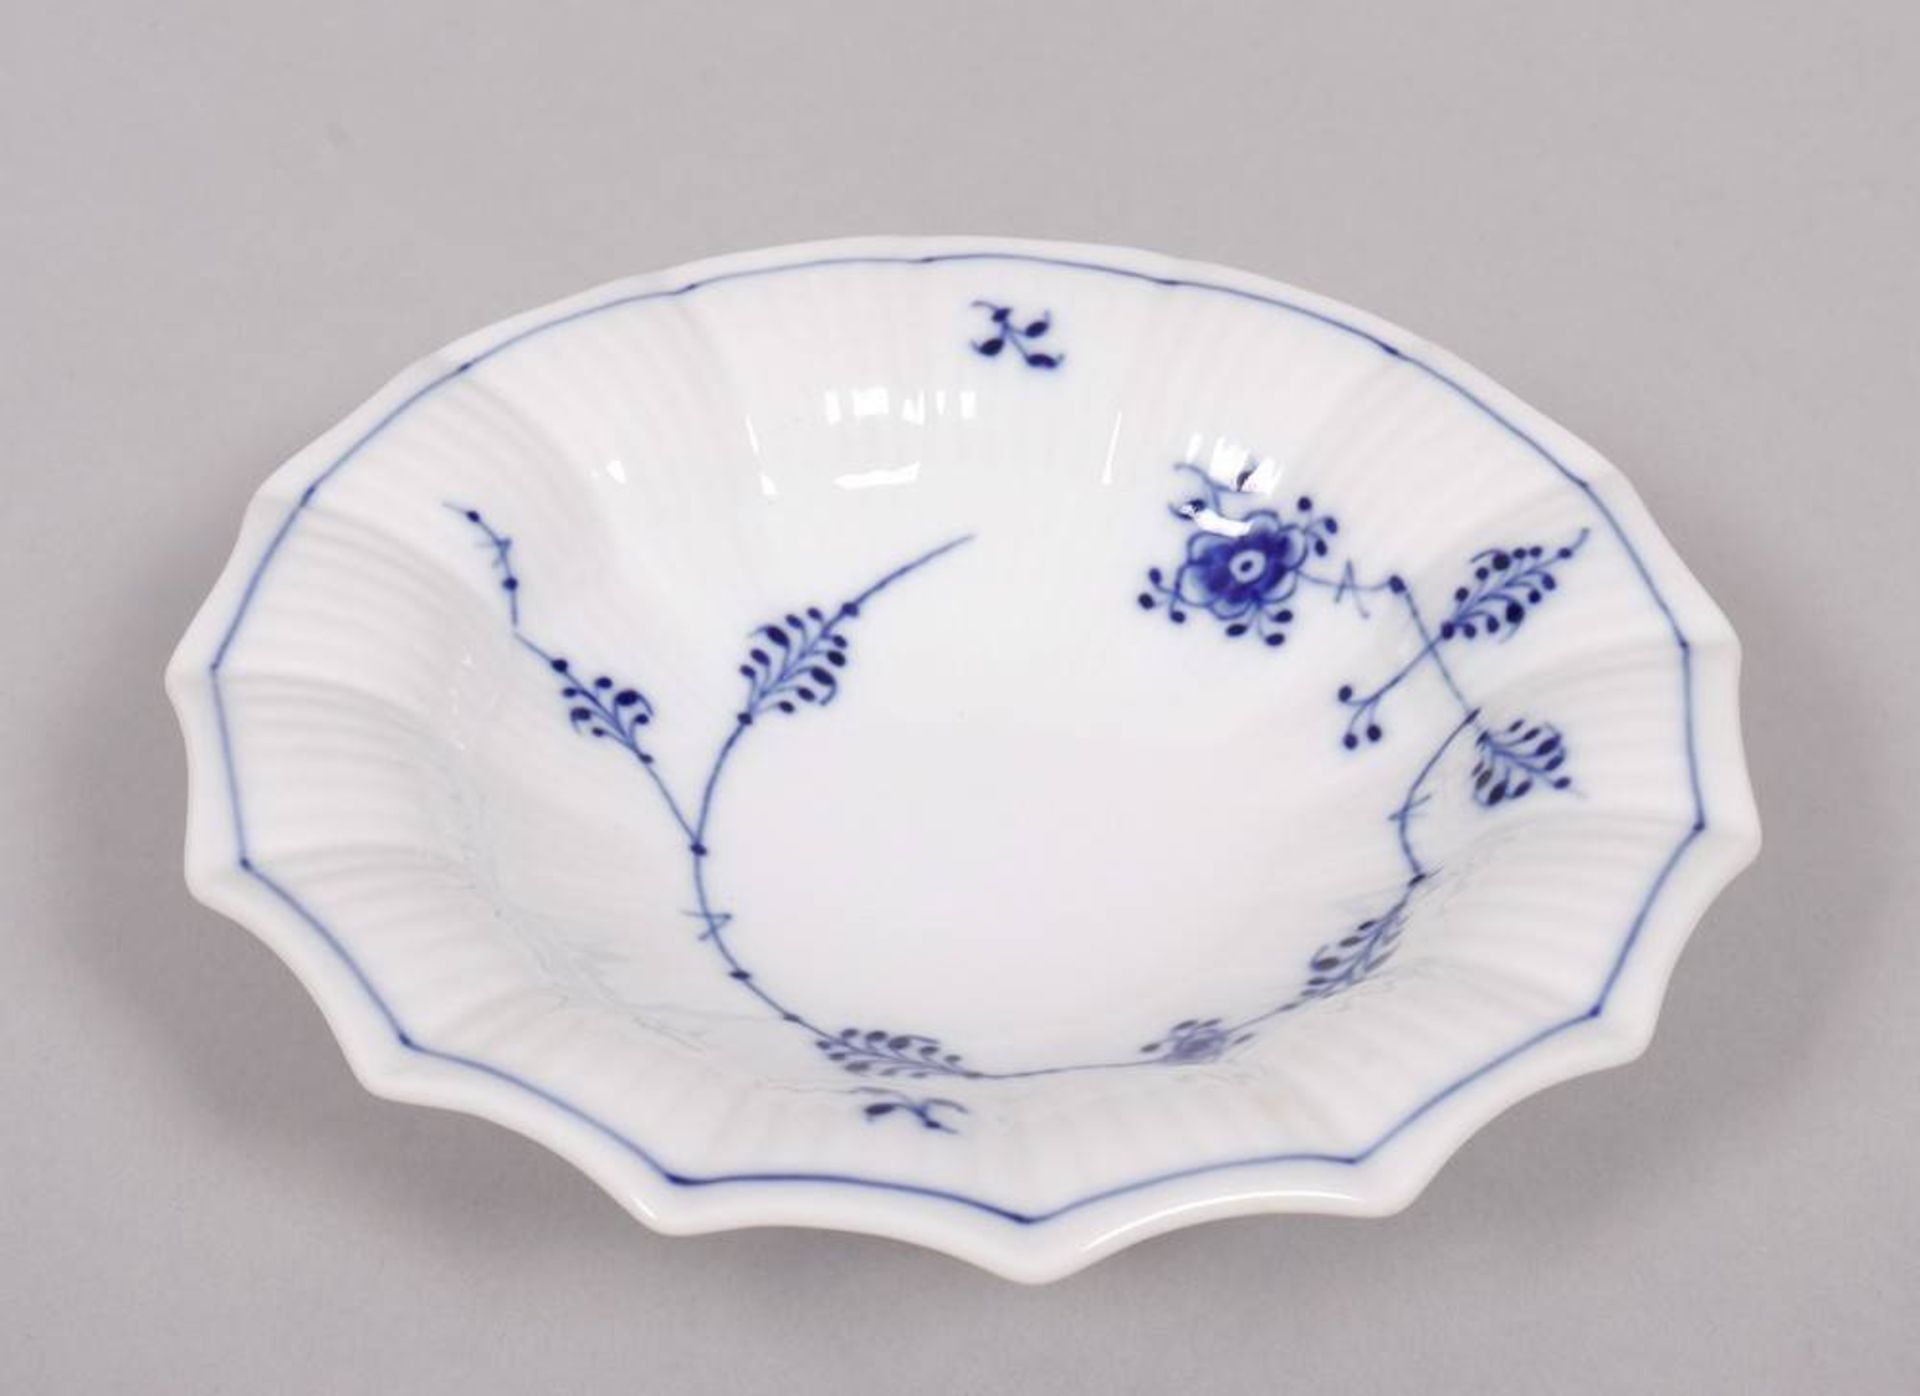 Small lot of porcelain, Royal Copenhagen, late 20th C., "Musselmalet" decor - Image 7 of 8